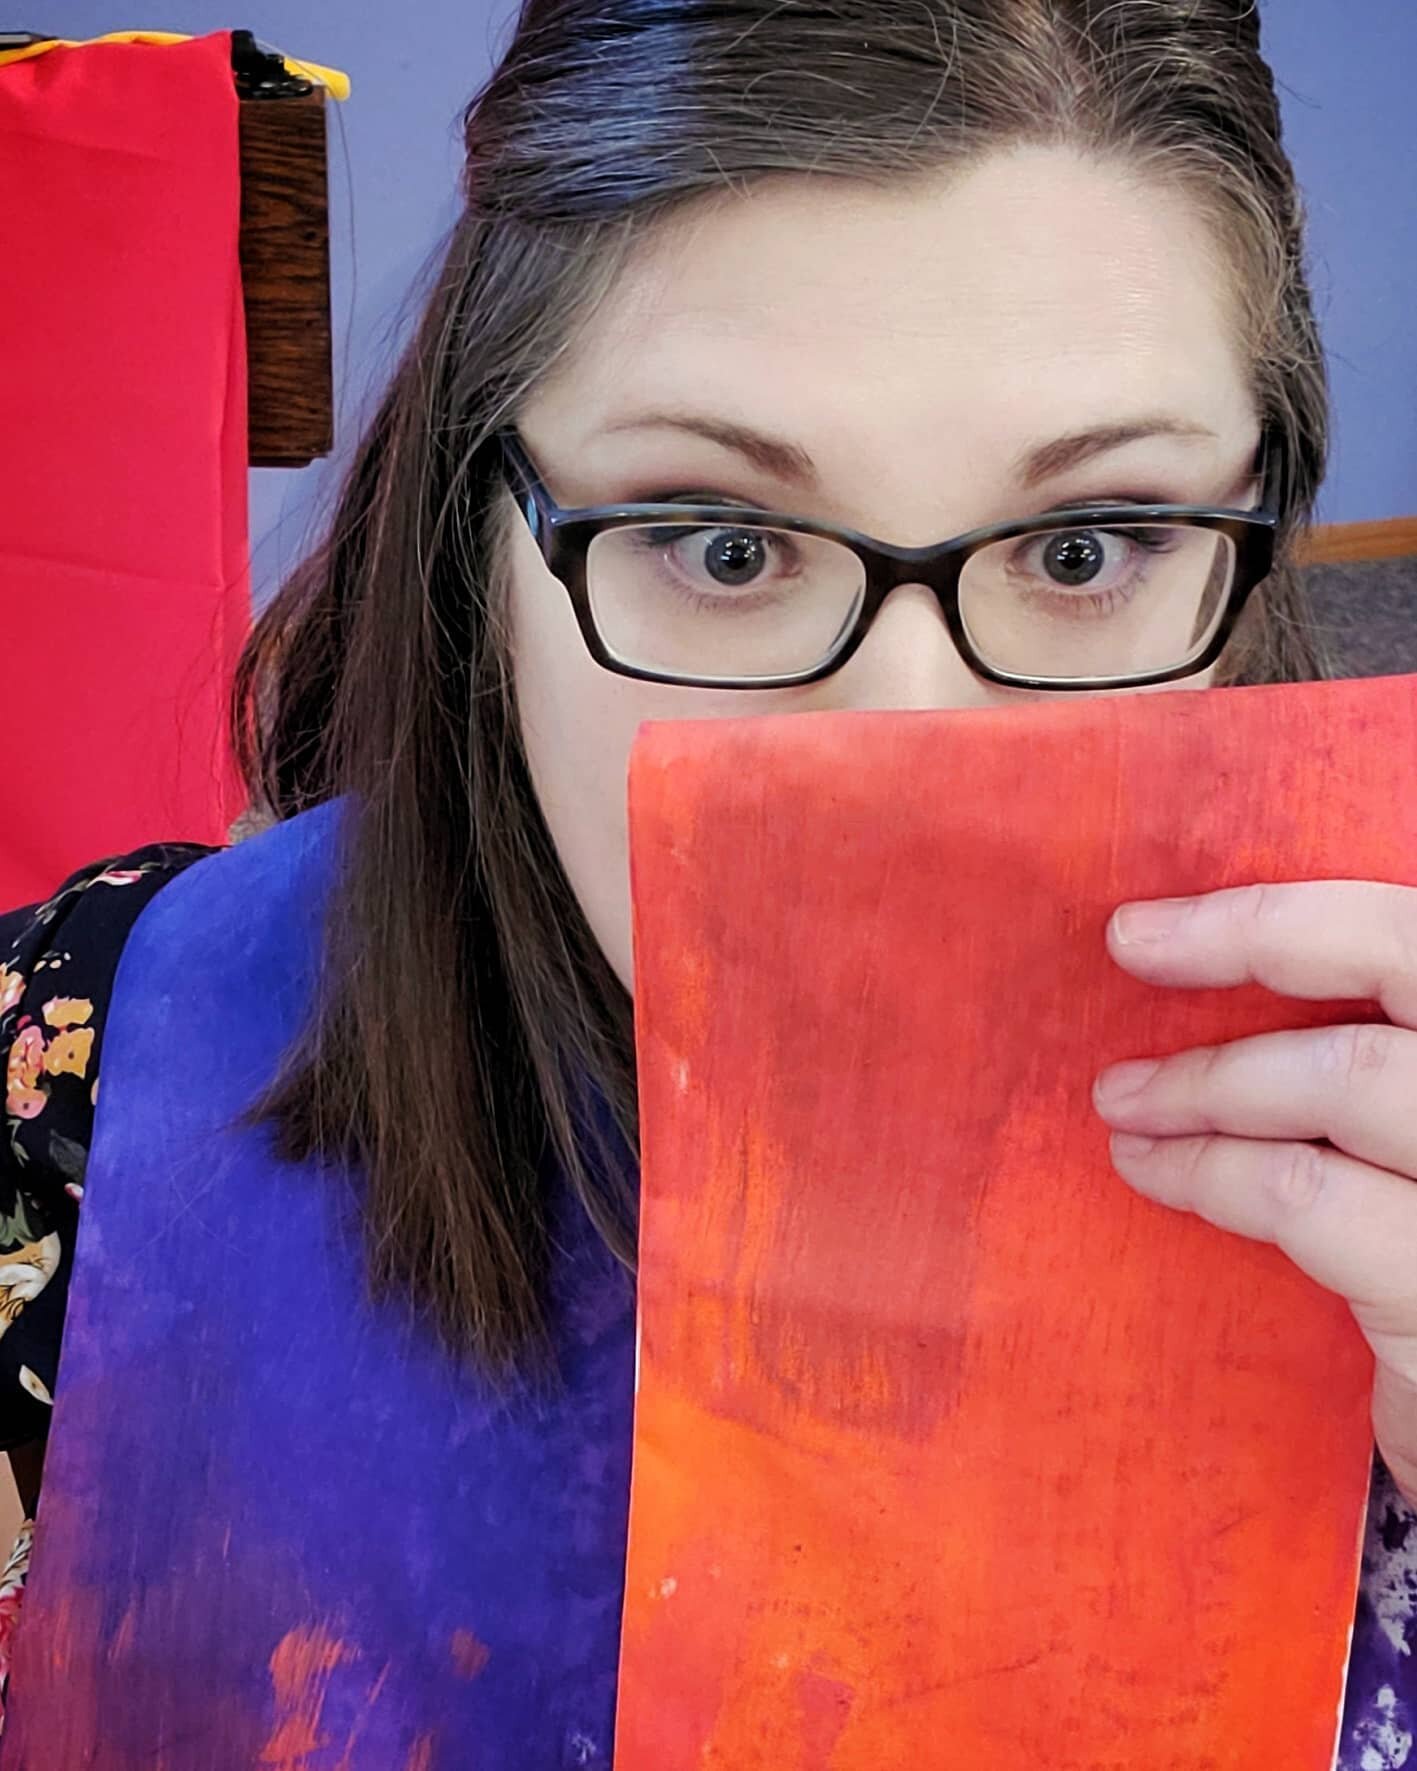 When someone says &quot;Of course you can wear a stole&quot; and it's #pentecost you can't yet afford a new #stole. You can afford a half hour and some paint. 
#interimpastor #interimministry #unitedchurchofchrist #almostordained #crafttime